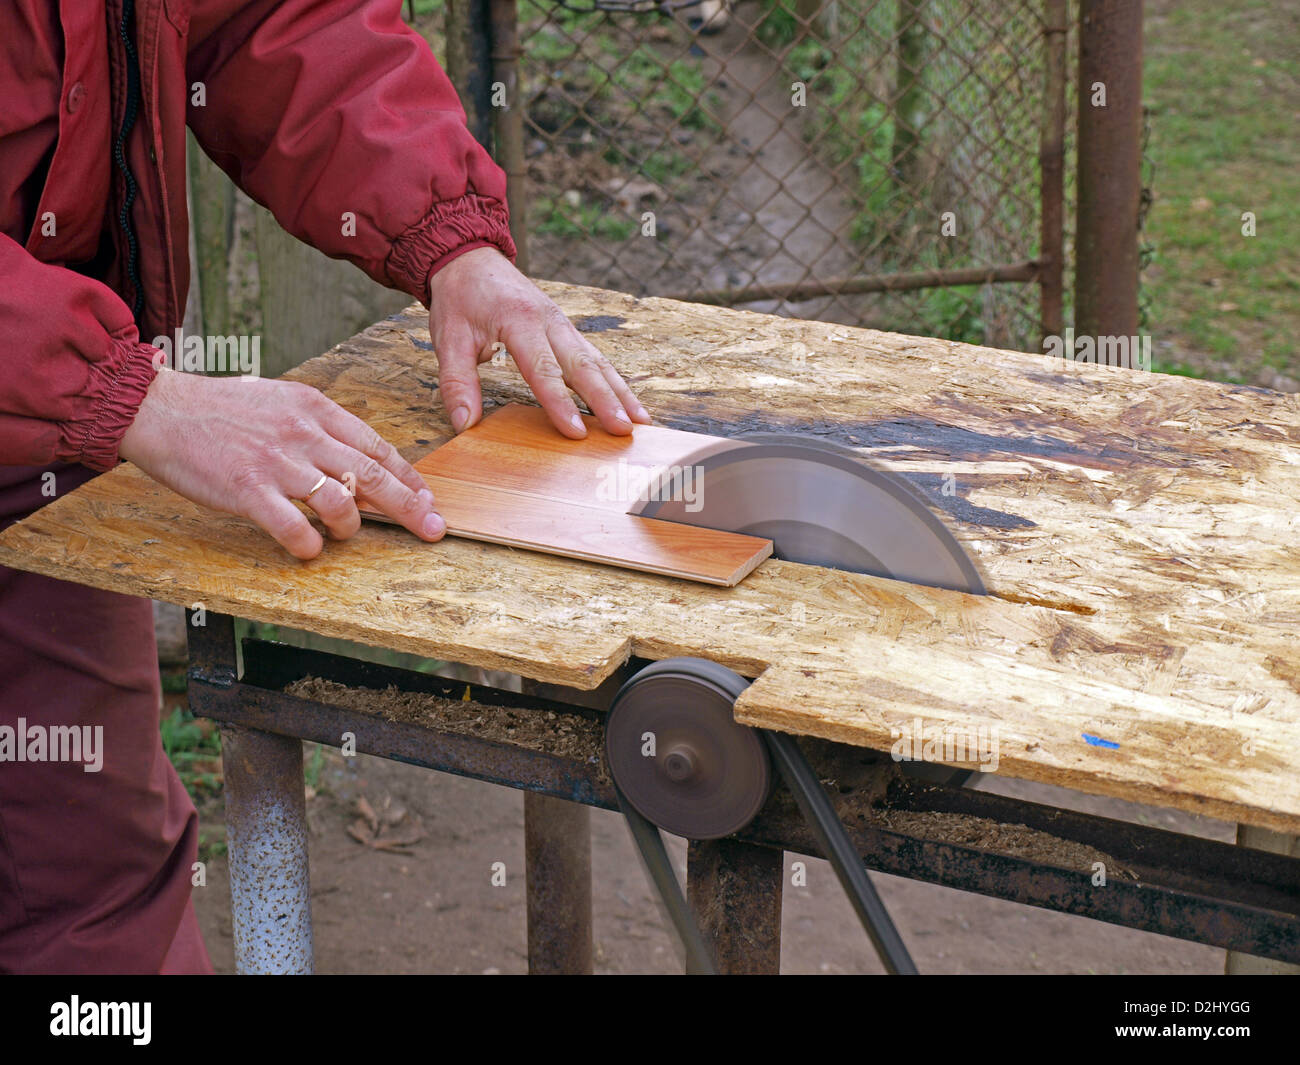 Sawing laminate floorboards by homemade circular saw Stock Photo